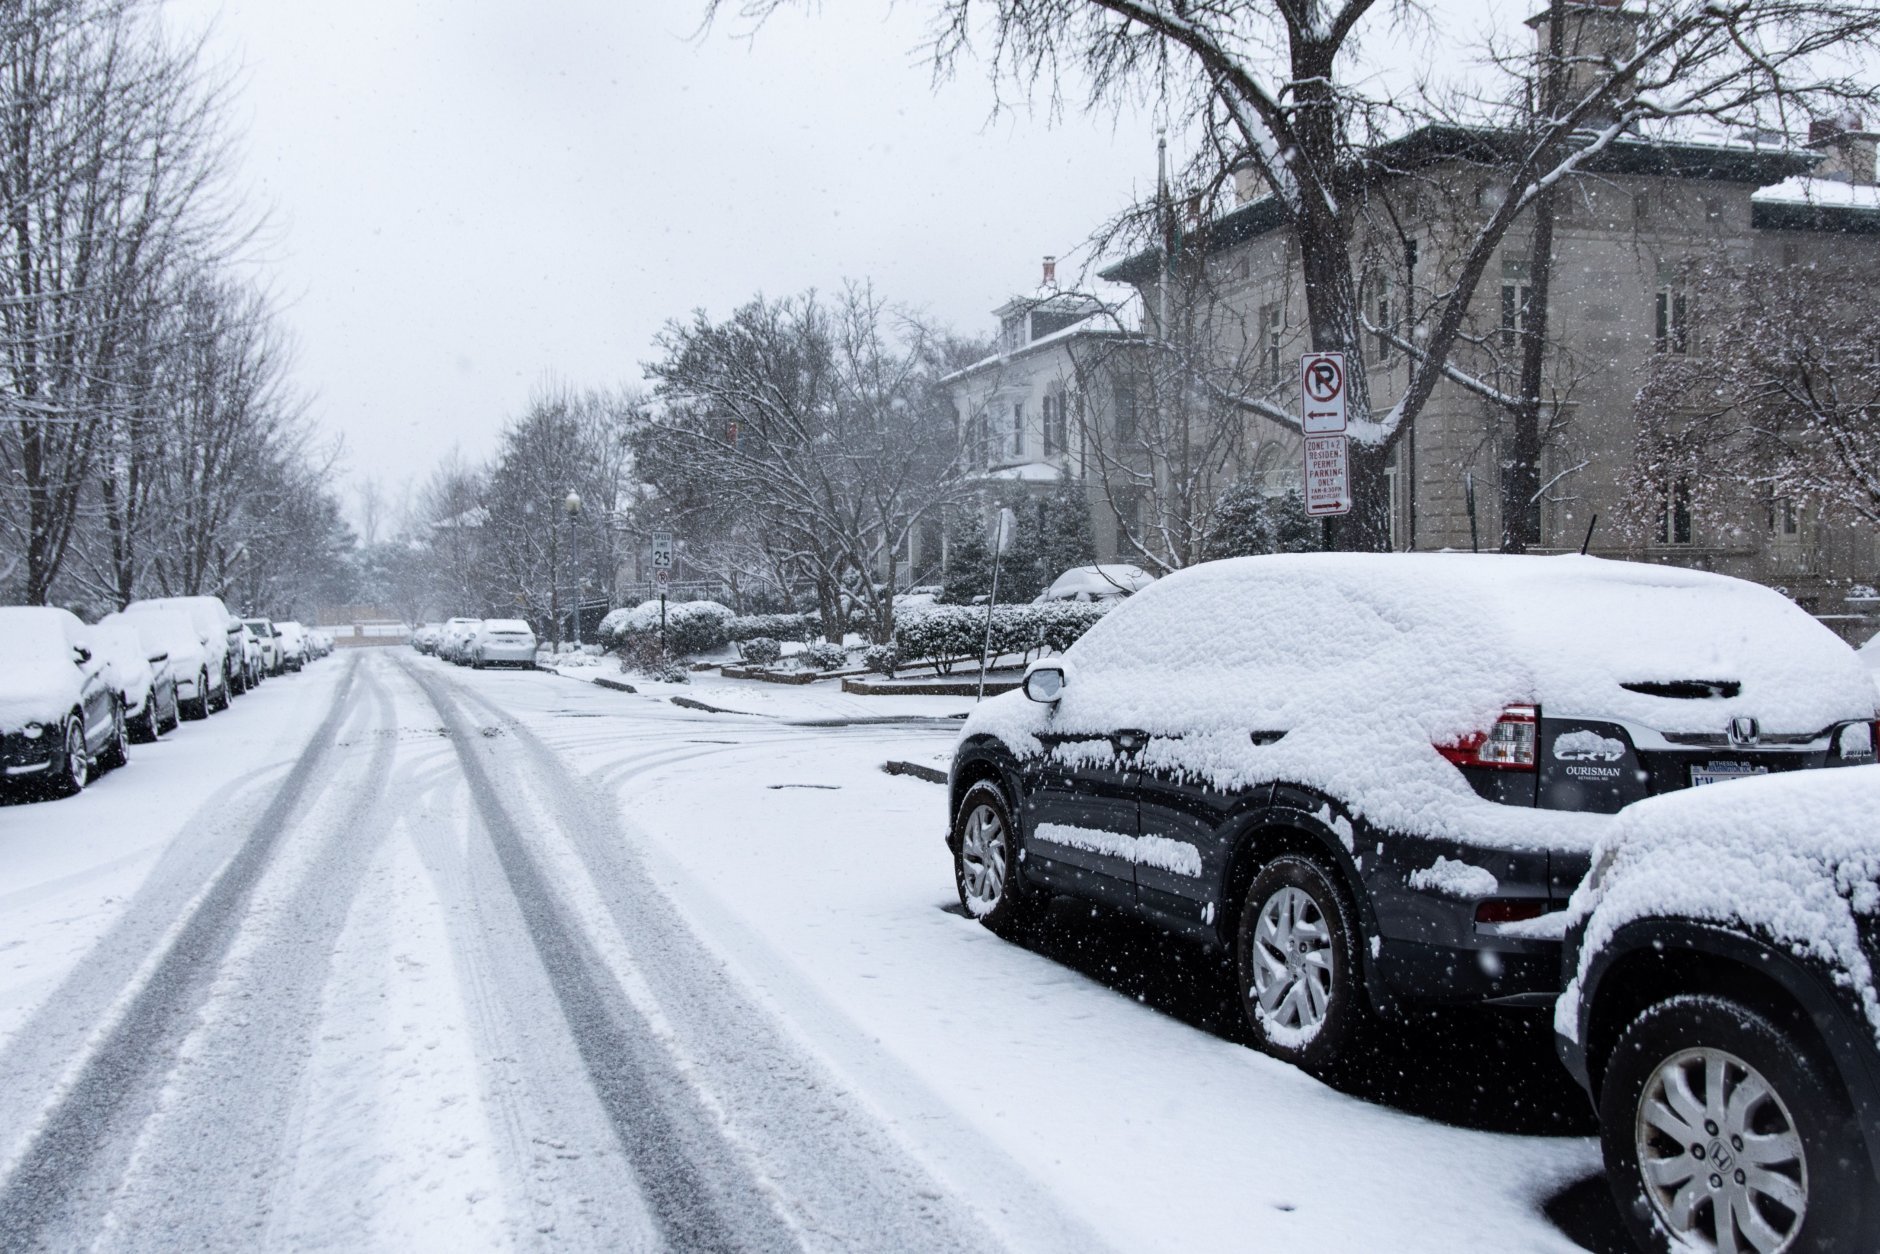 About three inches of snow had fallen in northwest D.C. by mid-morning Wednesday — easily manageable for residents, but enough to snarl long-distance travel and close schools and federal offices. (WTOP/Alejandro Alvarez)